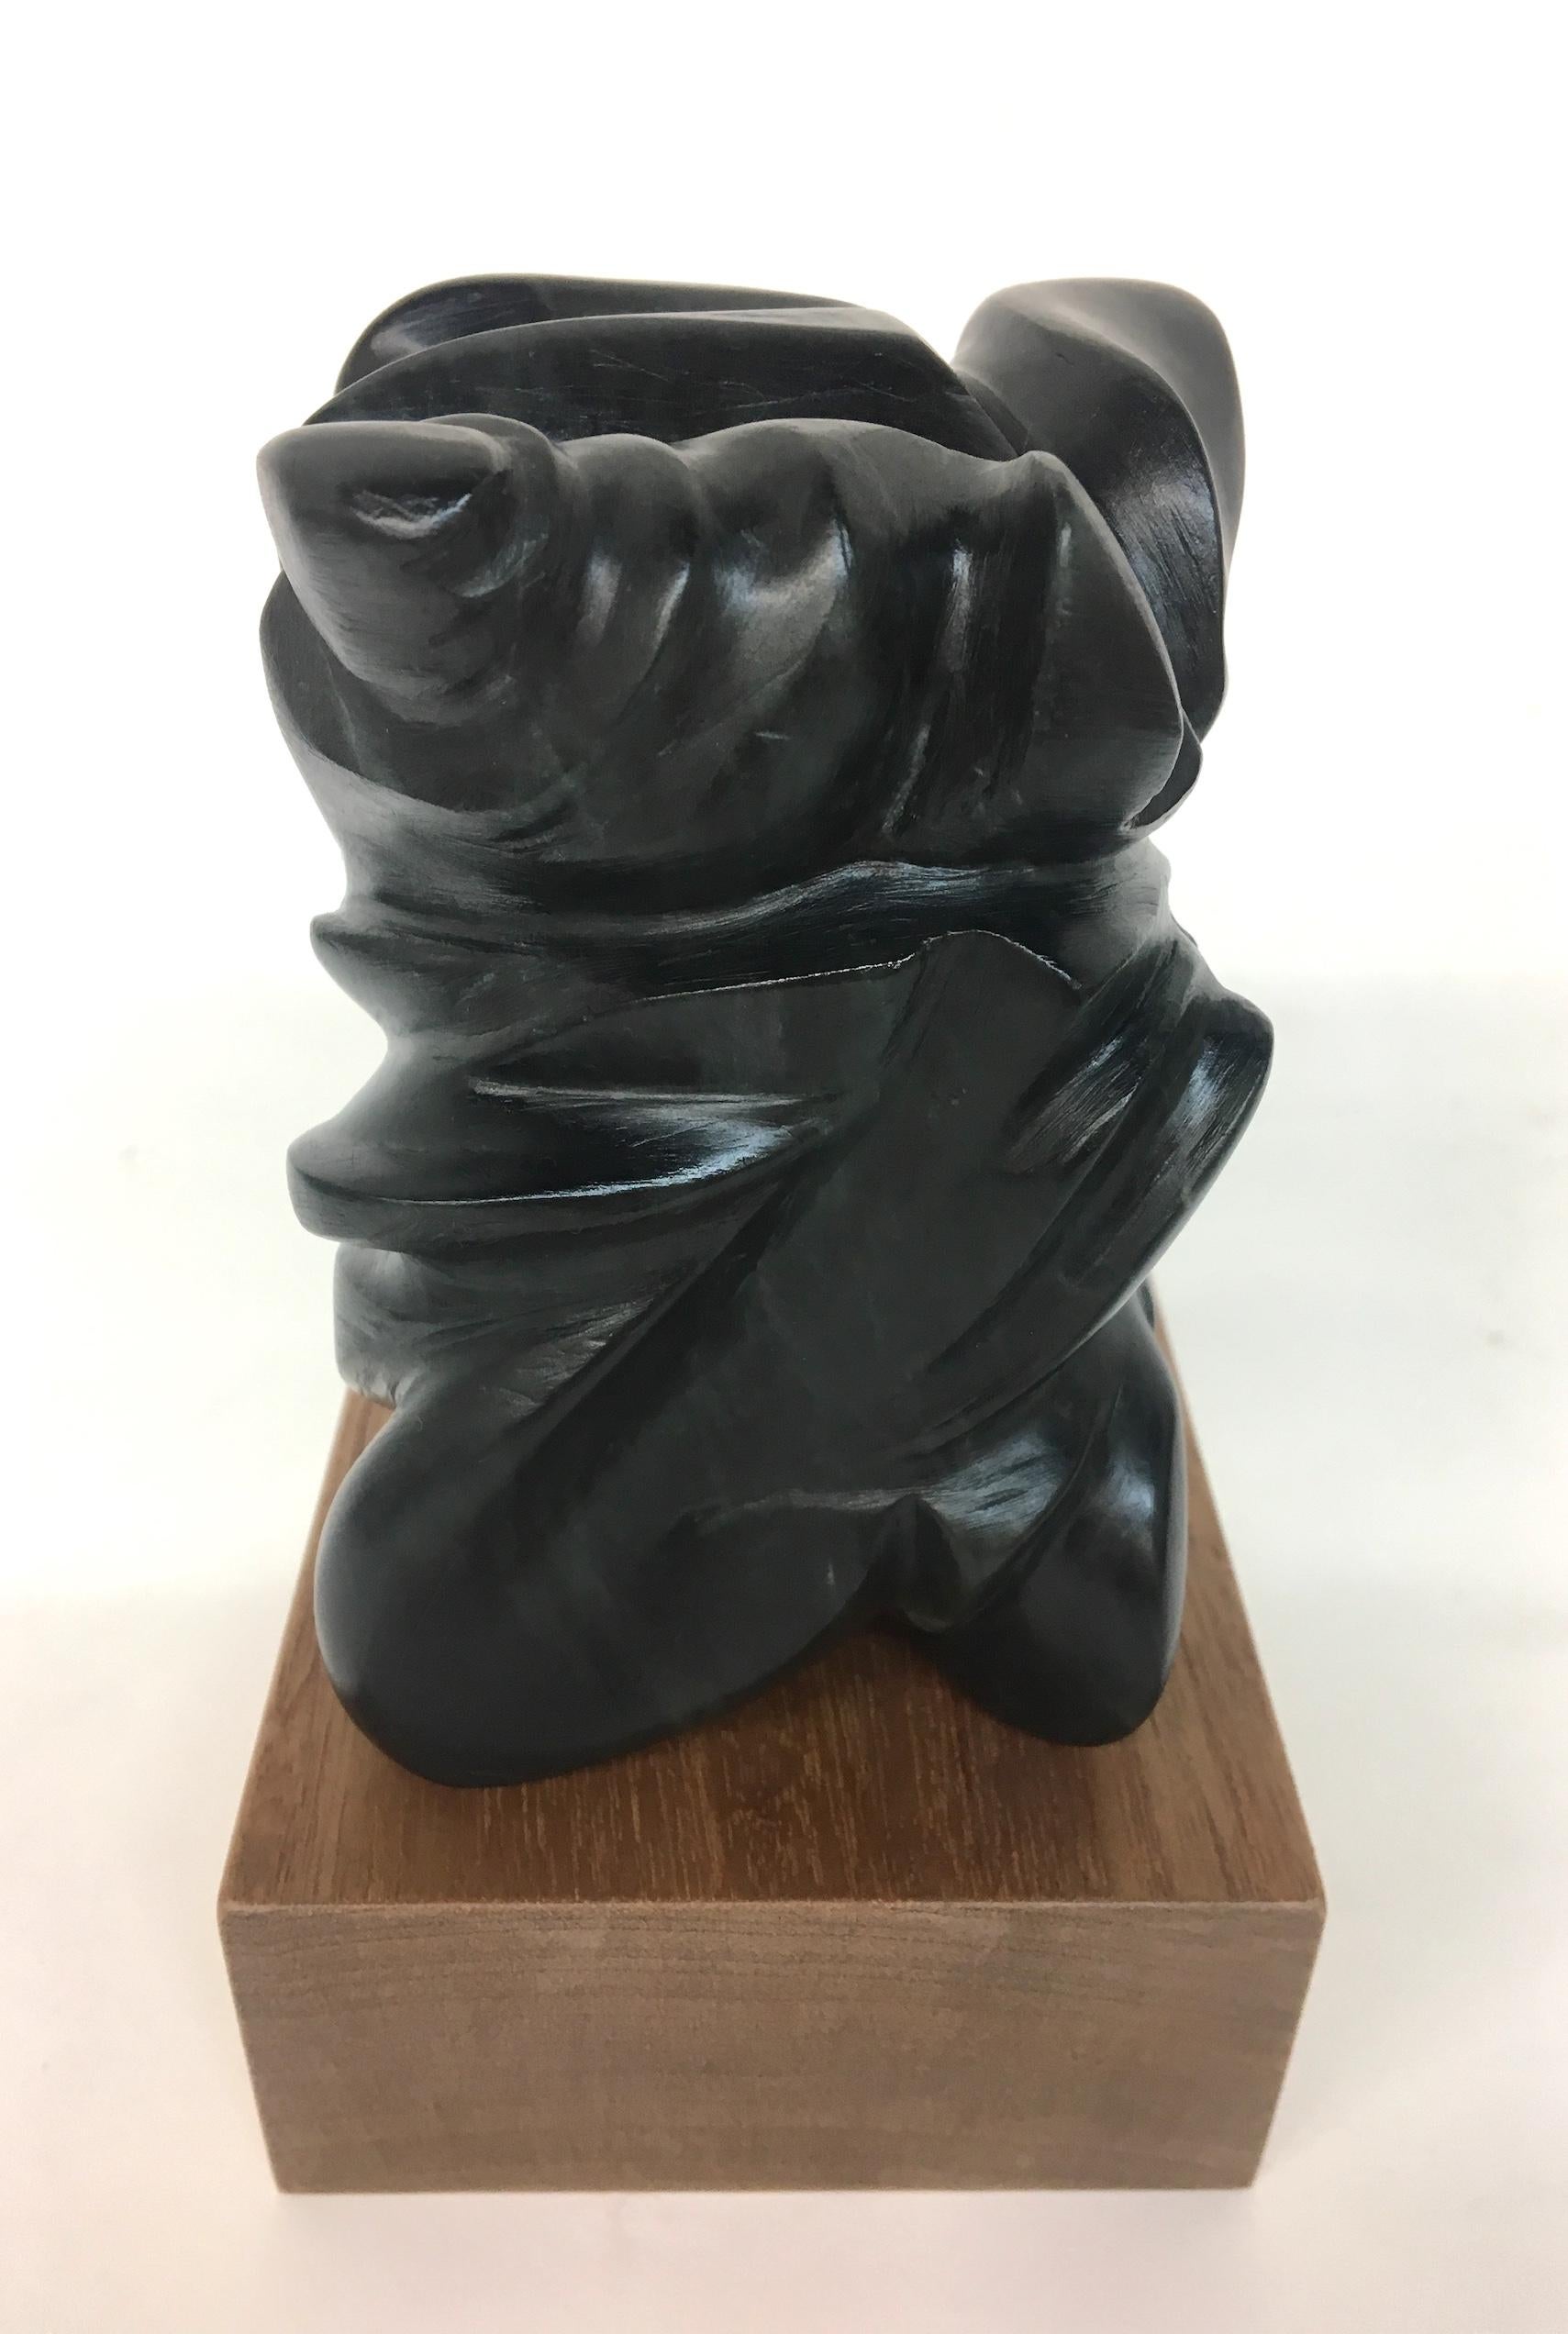 "MULTIPLICITY" Sculpture 4.5" x 3" x 3" inch by Melanie Newcombe

Hand carved soapstone with wooden base
The soapstone is reversible 
2018

* * * Melanie Newcombe * * *
* * Artist Statement * *
I am perpetually pushing materials toward innovative